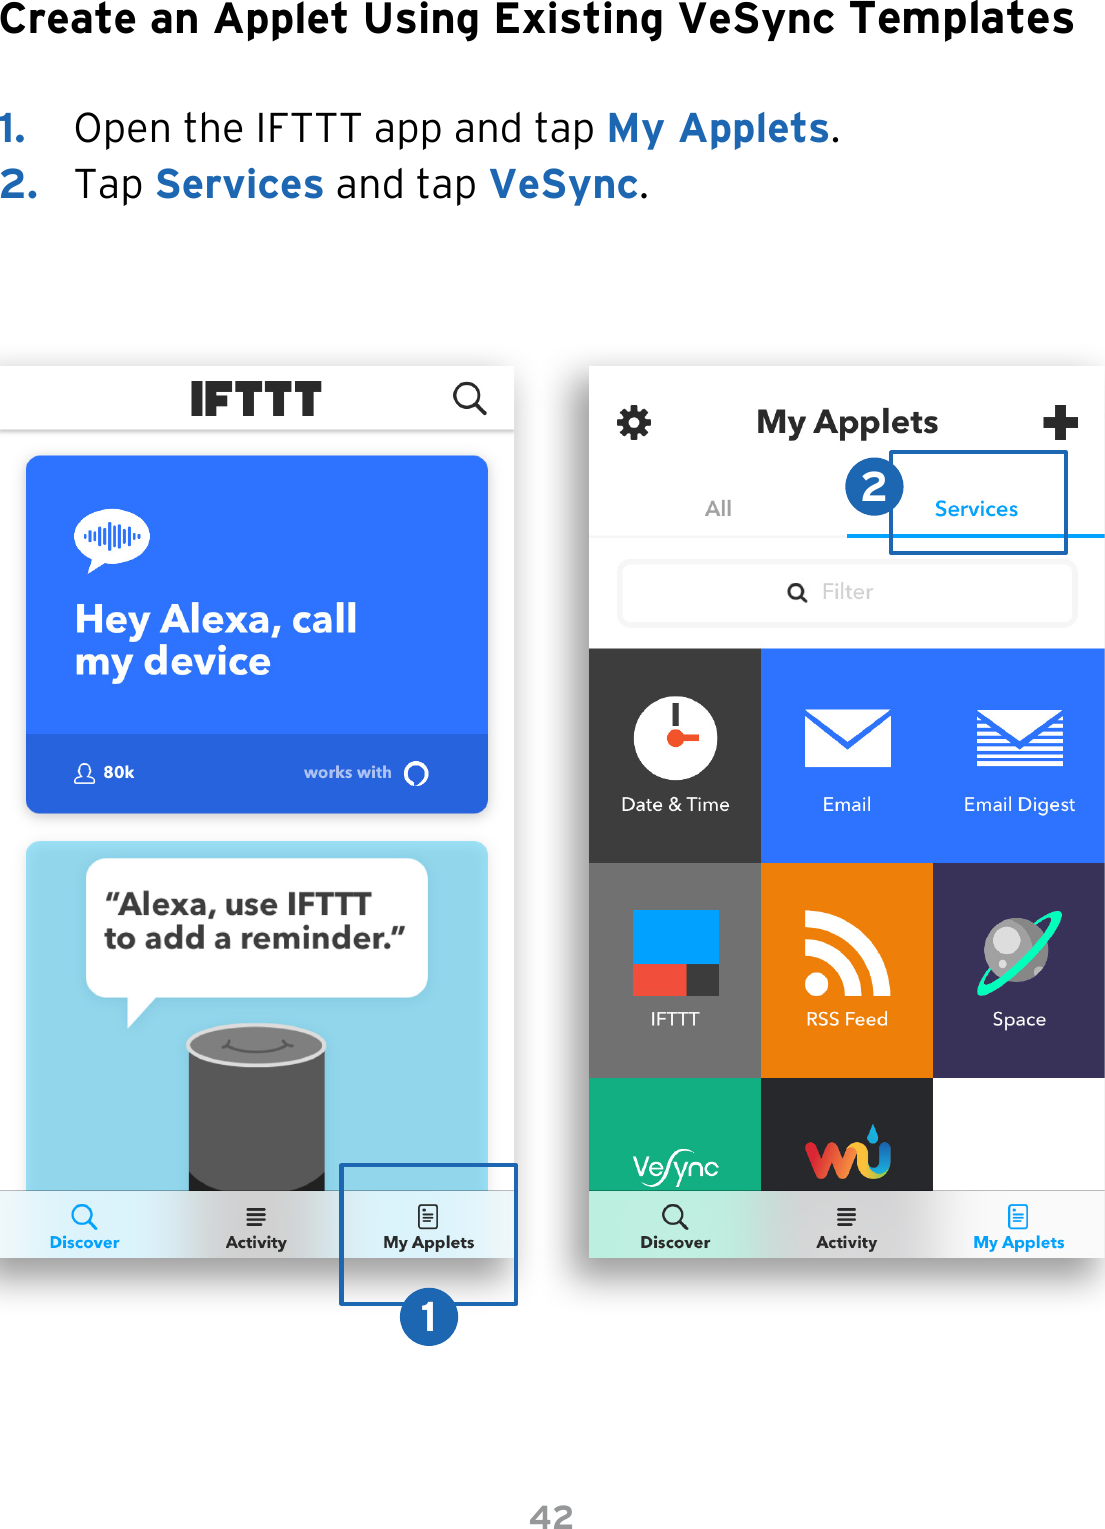 42Create an Applet Using Existing VeSync Templates1.  Open the IFTTT app and tap My Applets.2.  Tap Services and tap VeSync.12